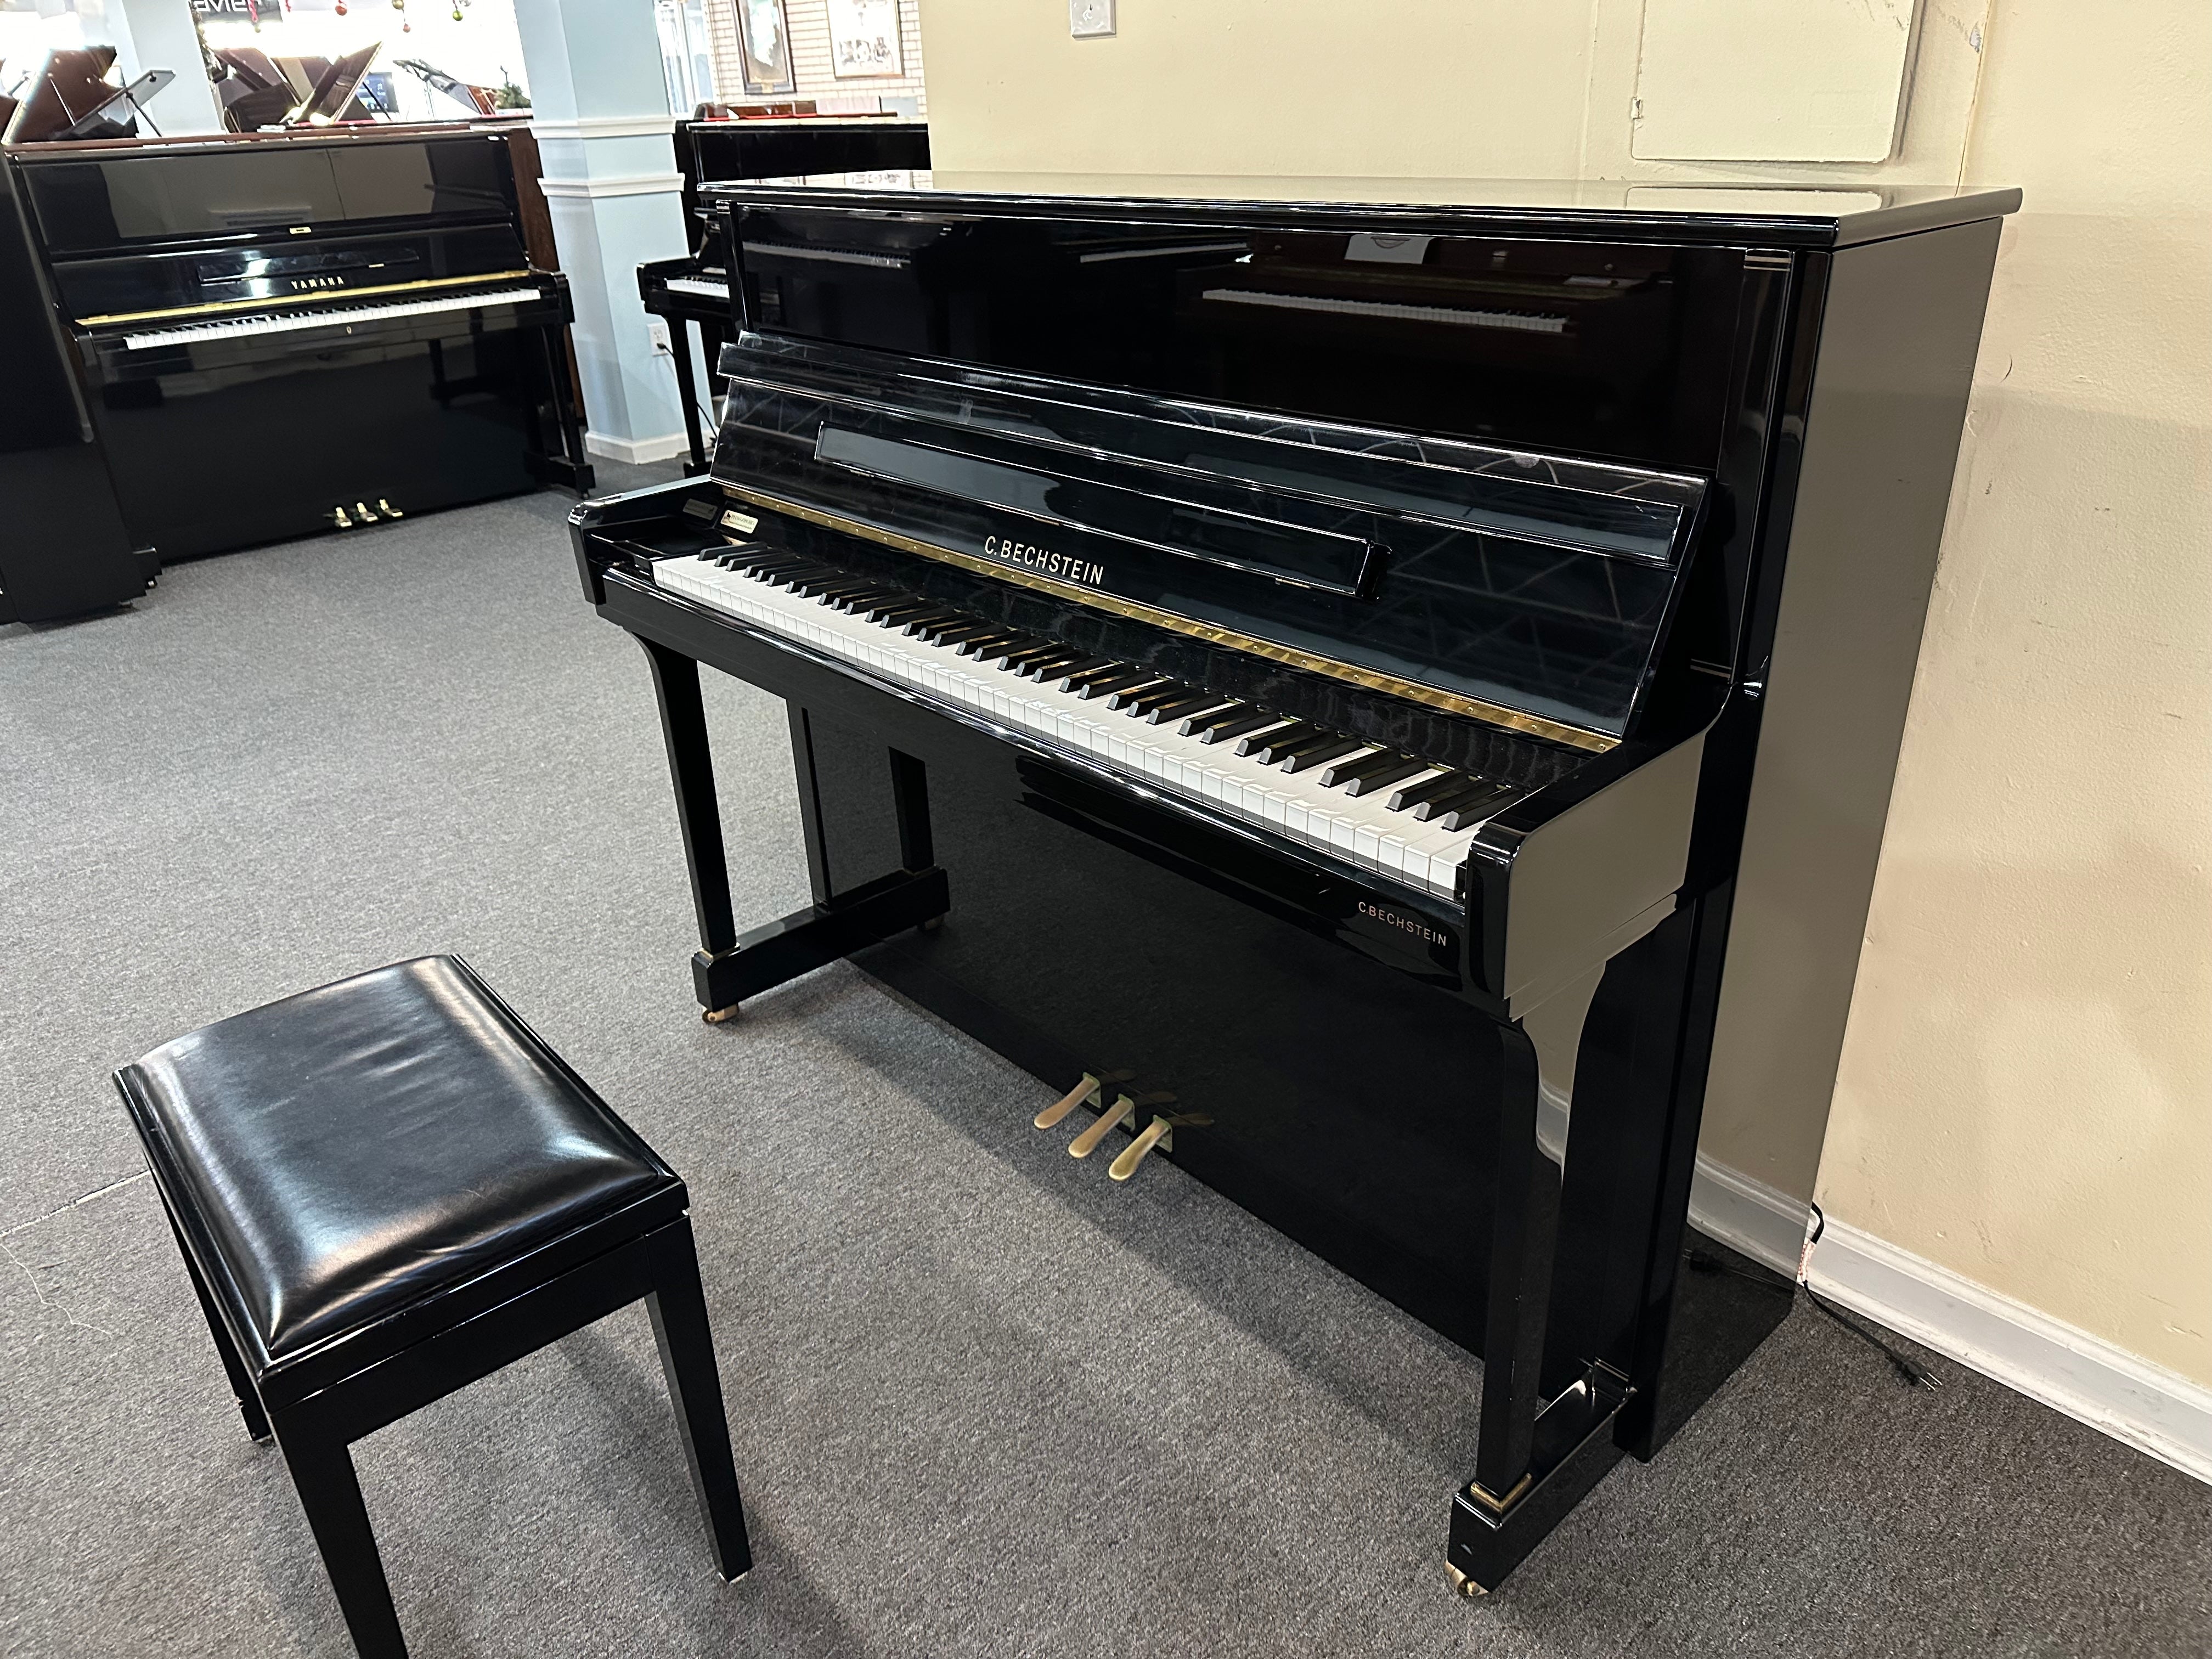 C. Bechstein Model 118 46.5" Upright Piano - Preowned